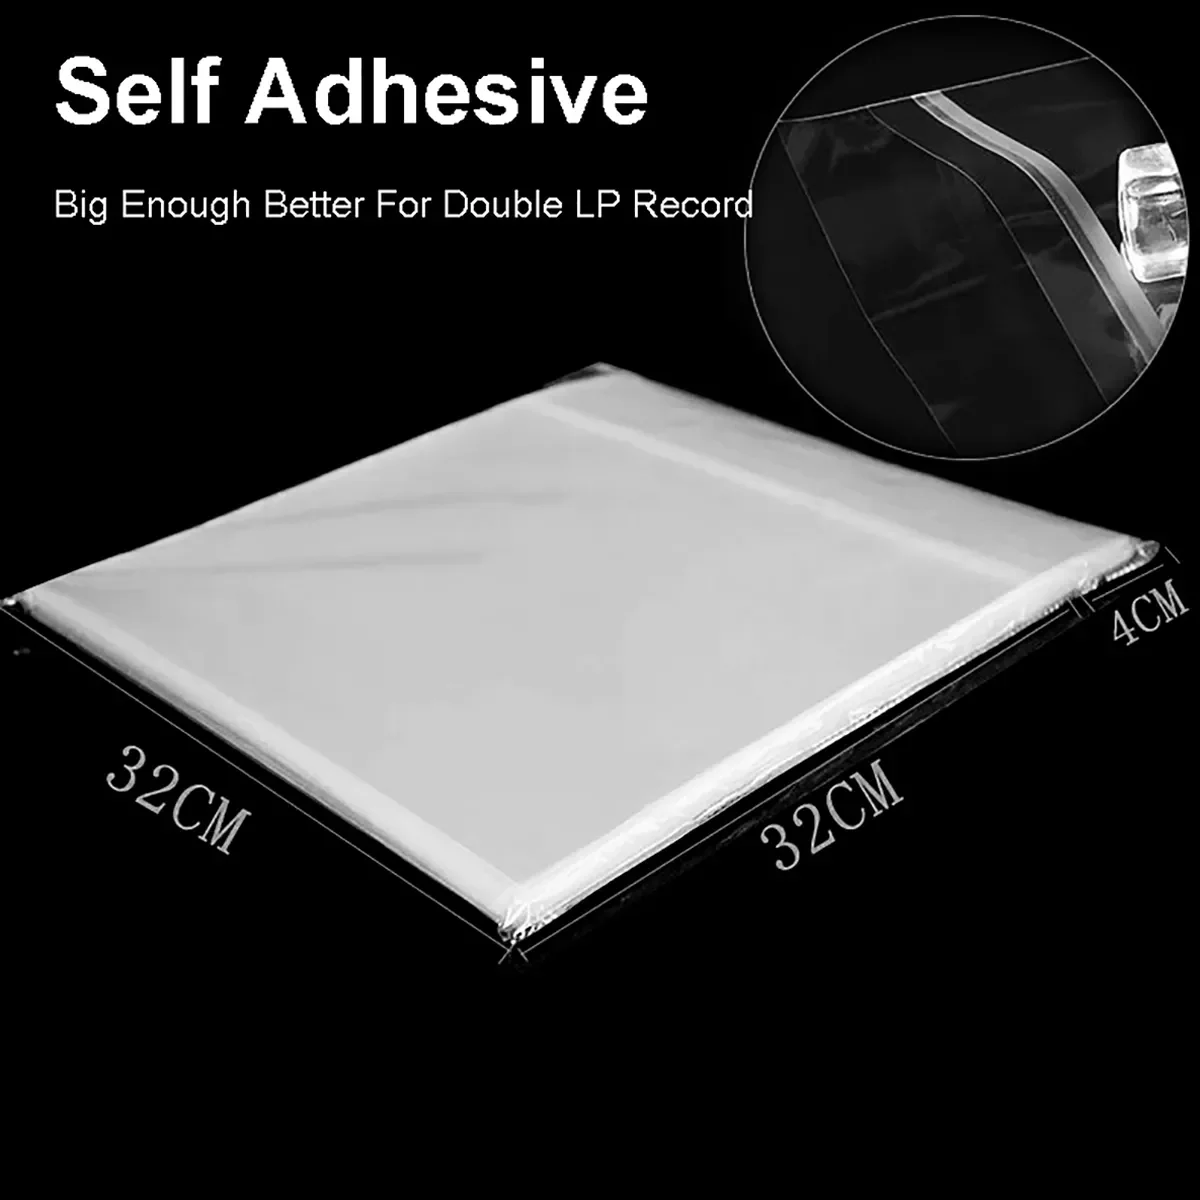 

NEW OPP Gel Recording Protective Sleeve for Turntable Player LP Vinyl Record Self Adhesive Records Bag 12" 32.3cm*32cm